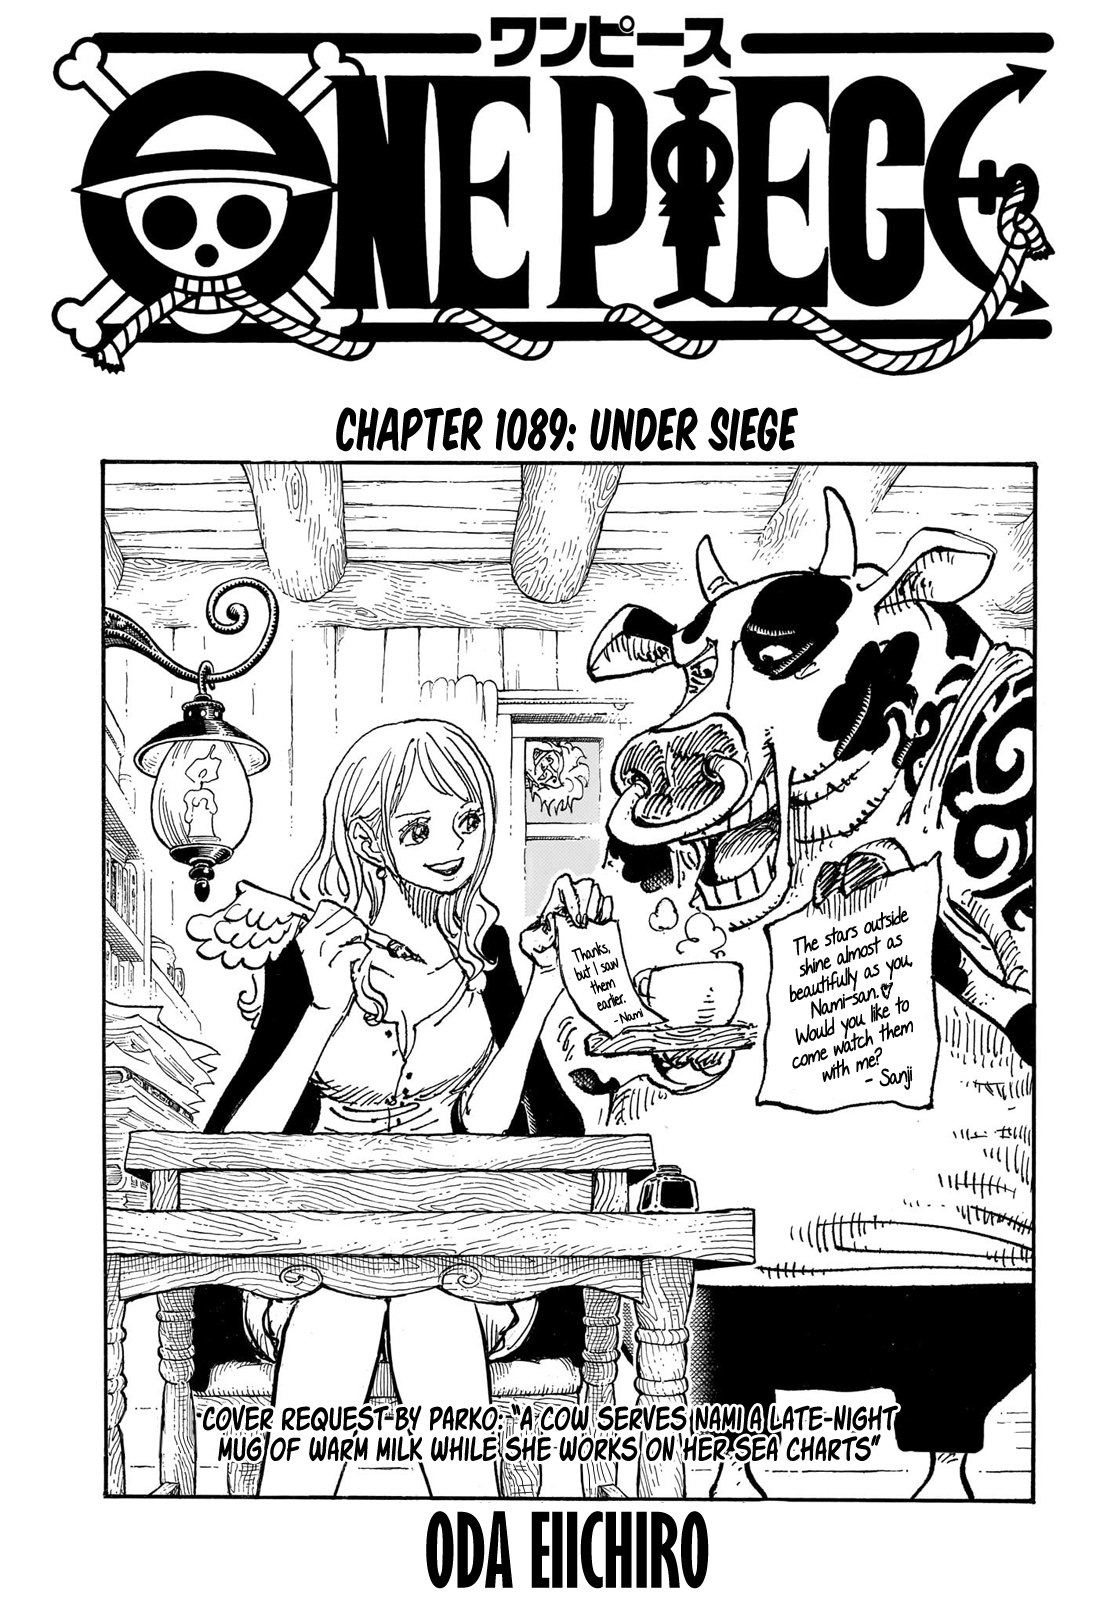 Read One Piece Chapter 1057 Raw Scan Manga Spoilers Out!